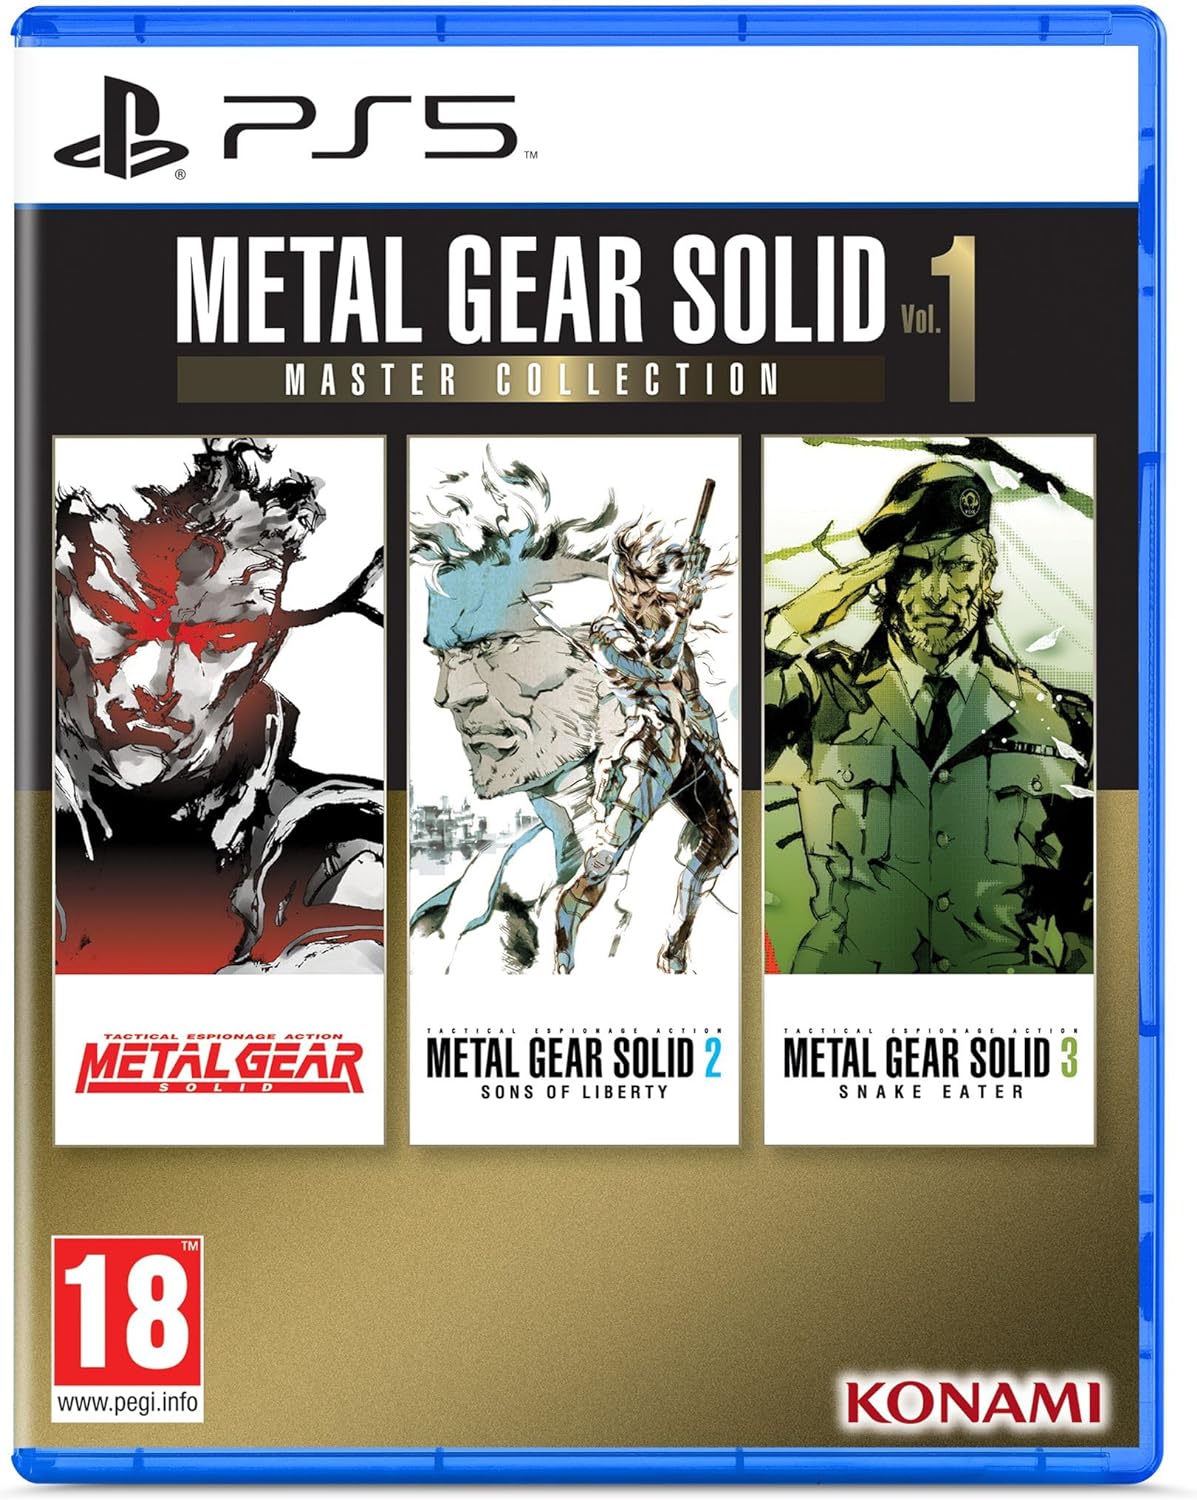 PS5 METAL GEAR SOLID MASTER COLLECTION VOL. 1